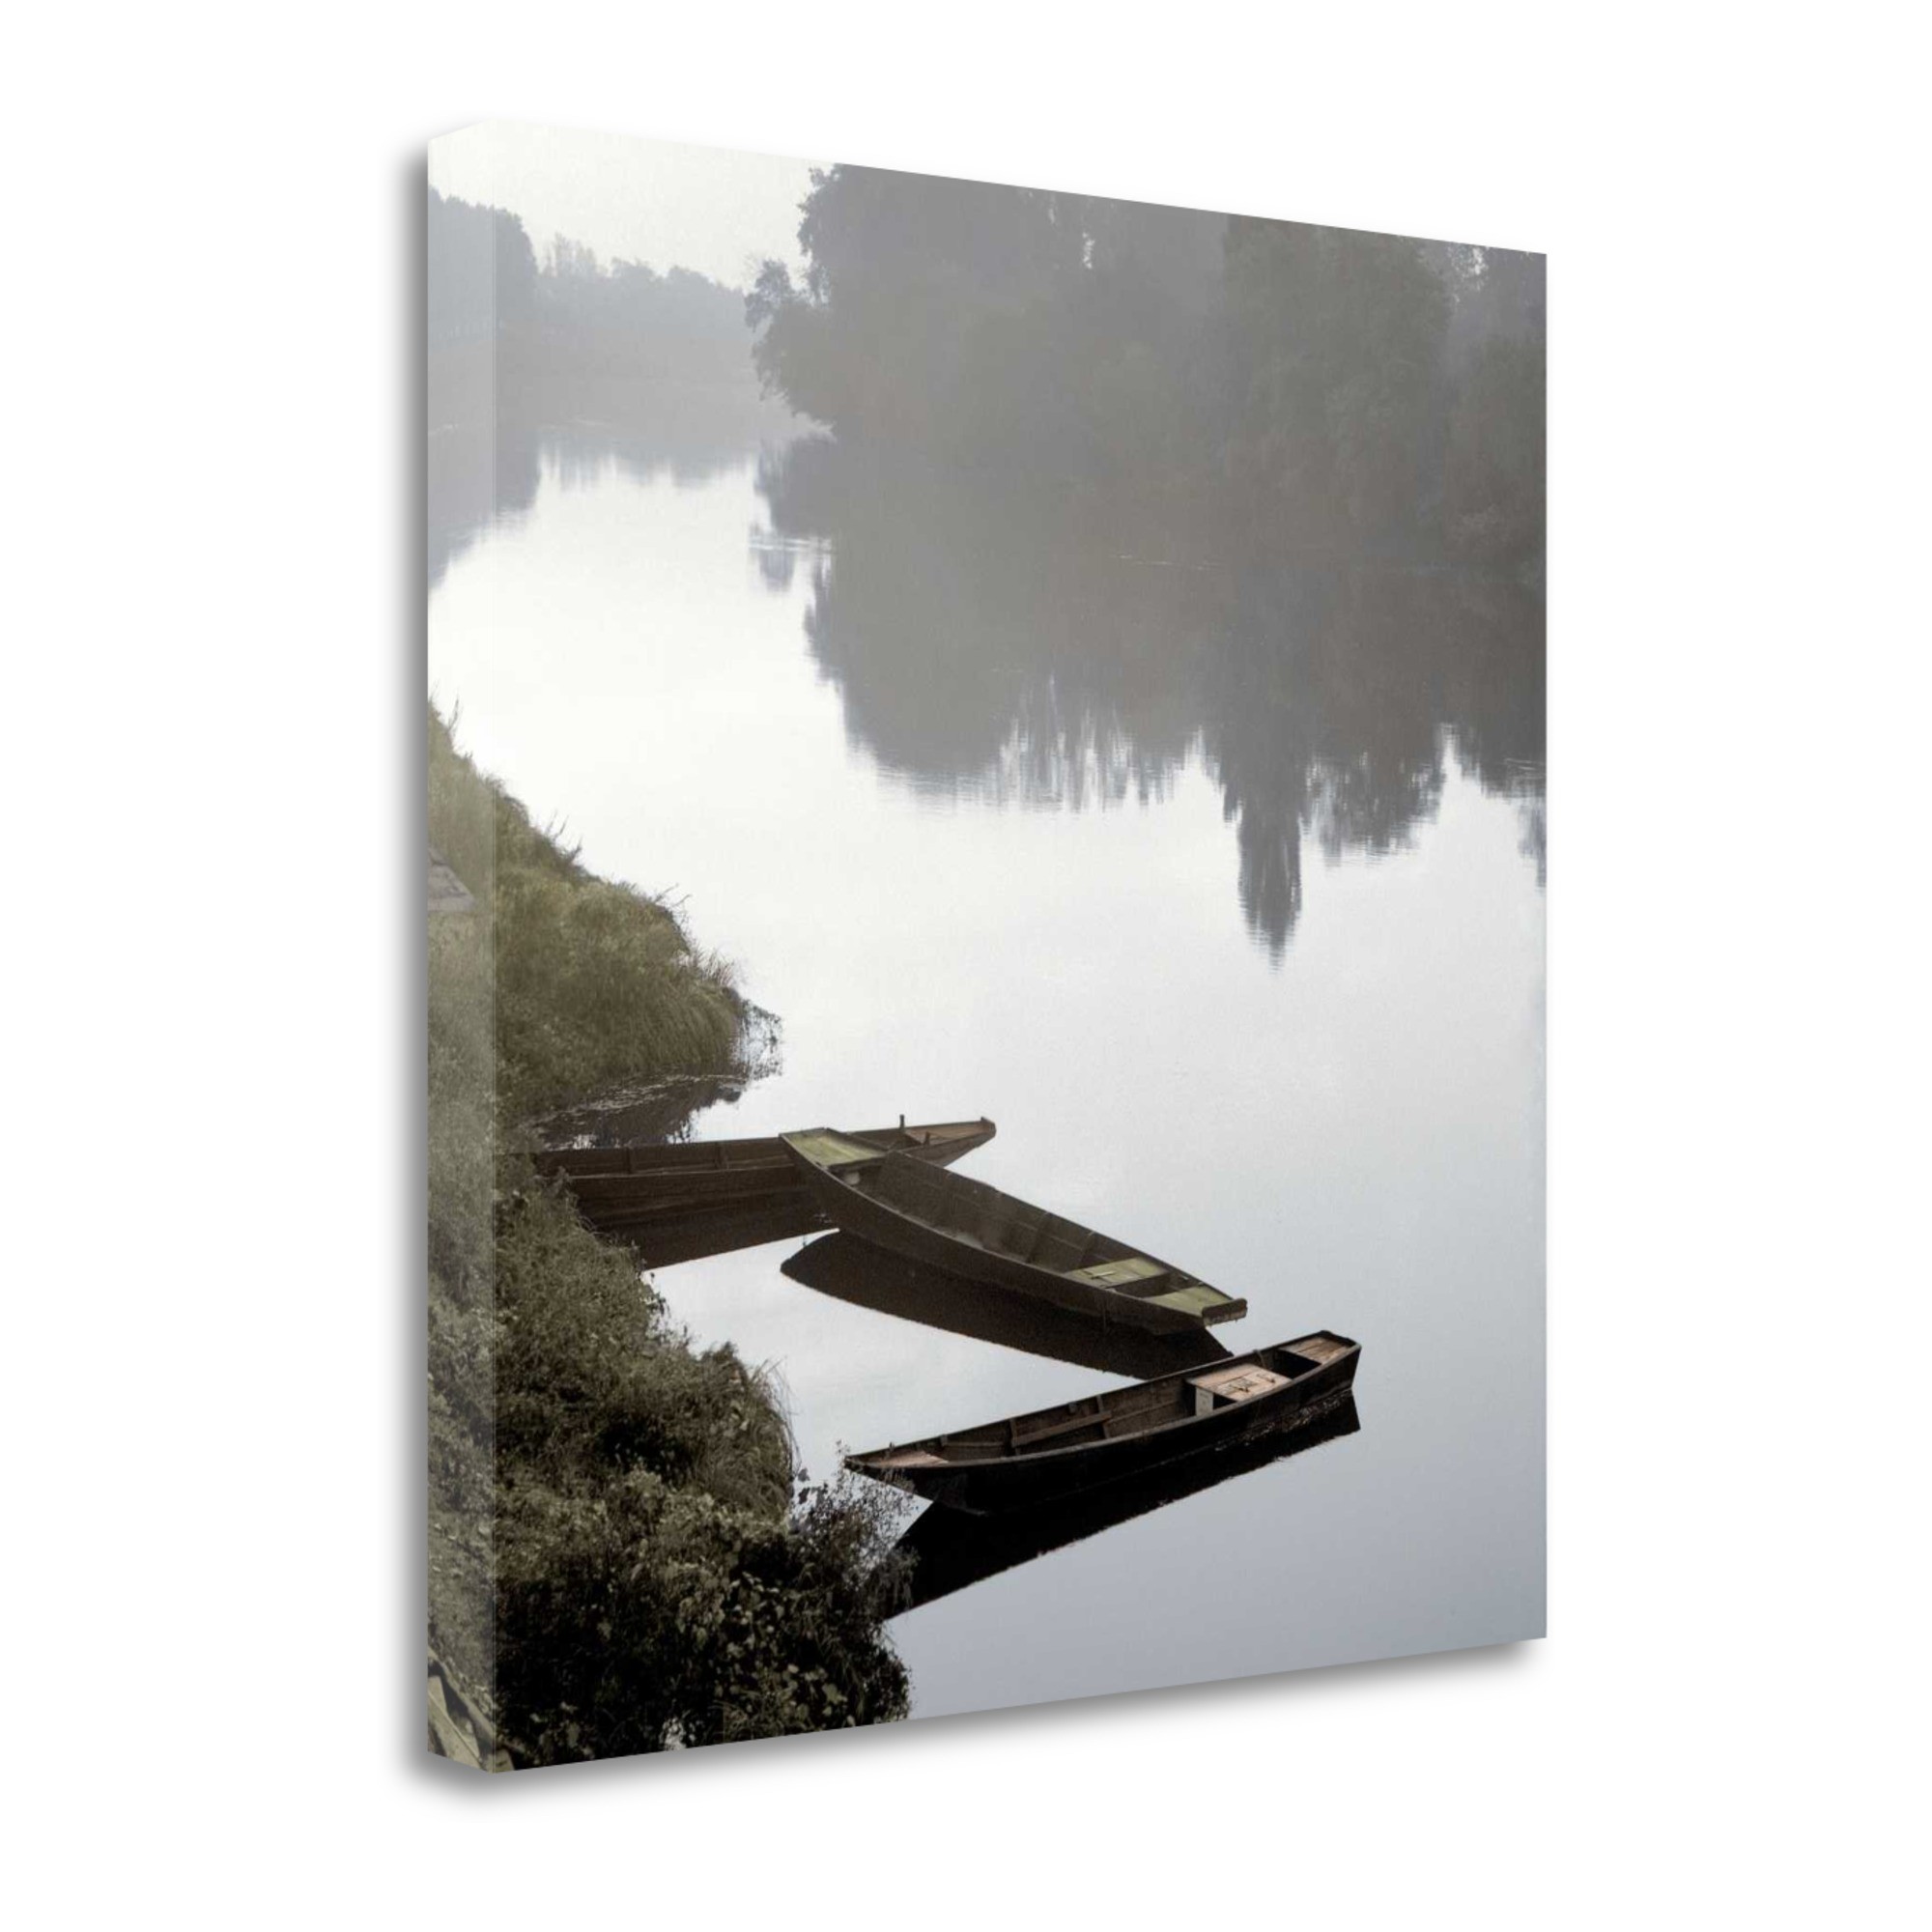 Overcast Lake View 4 Giclee Wrap Canvas Wall Art